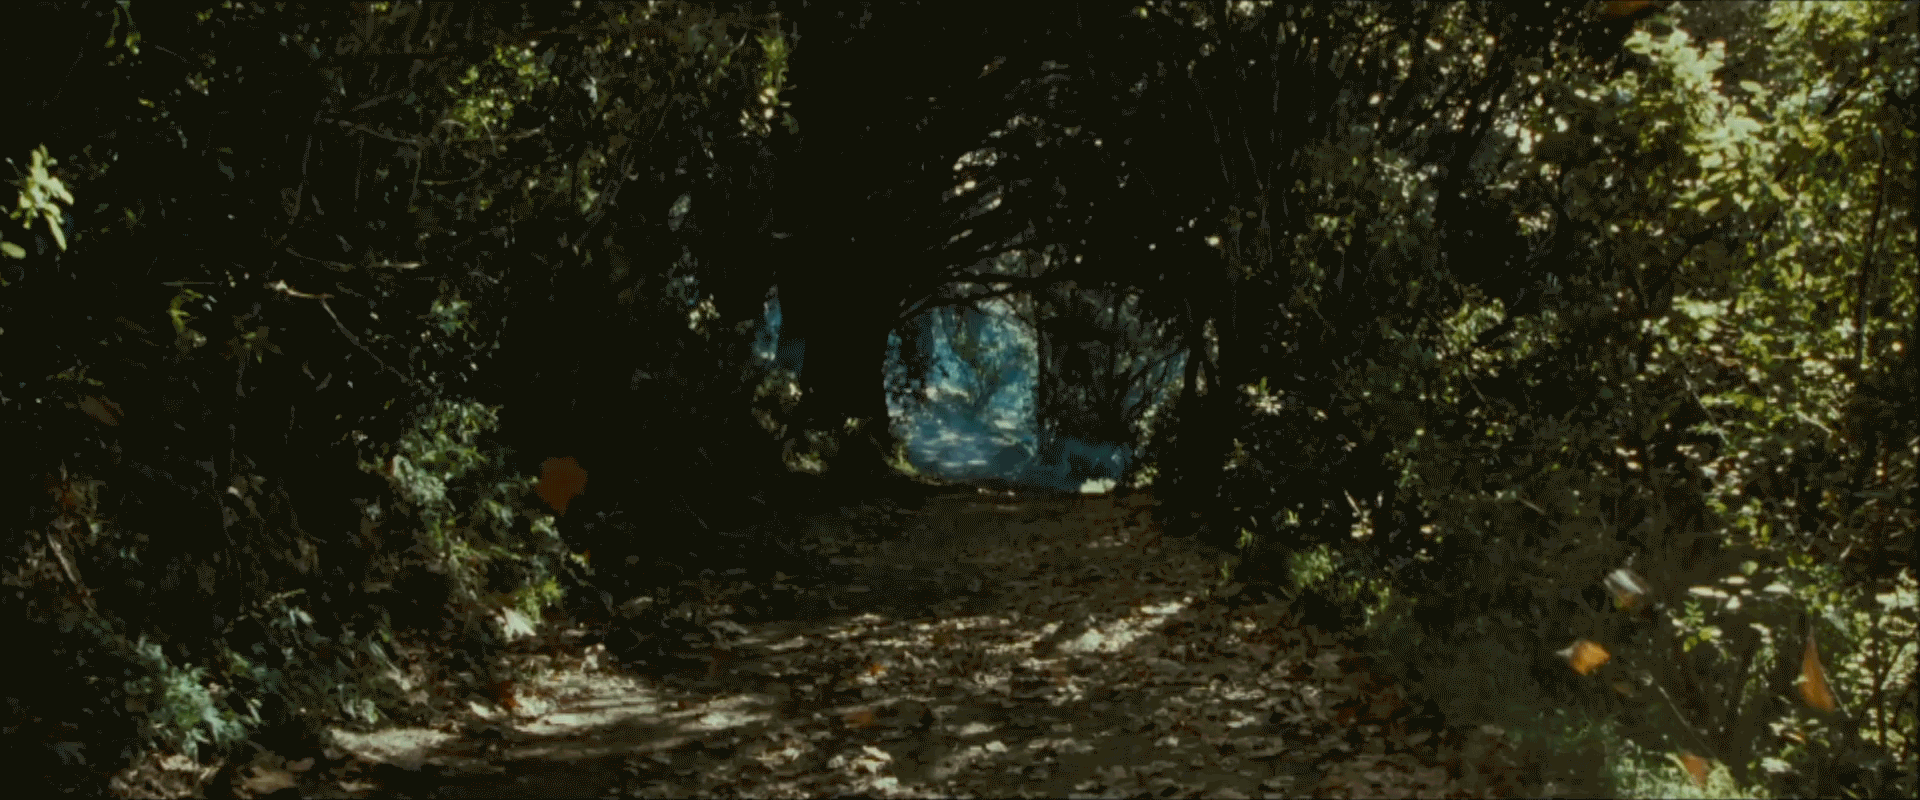 Fellowship Of The Ring GIF Find On GIFER